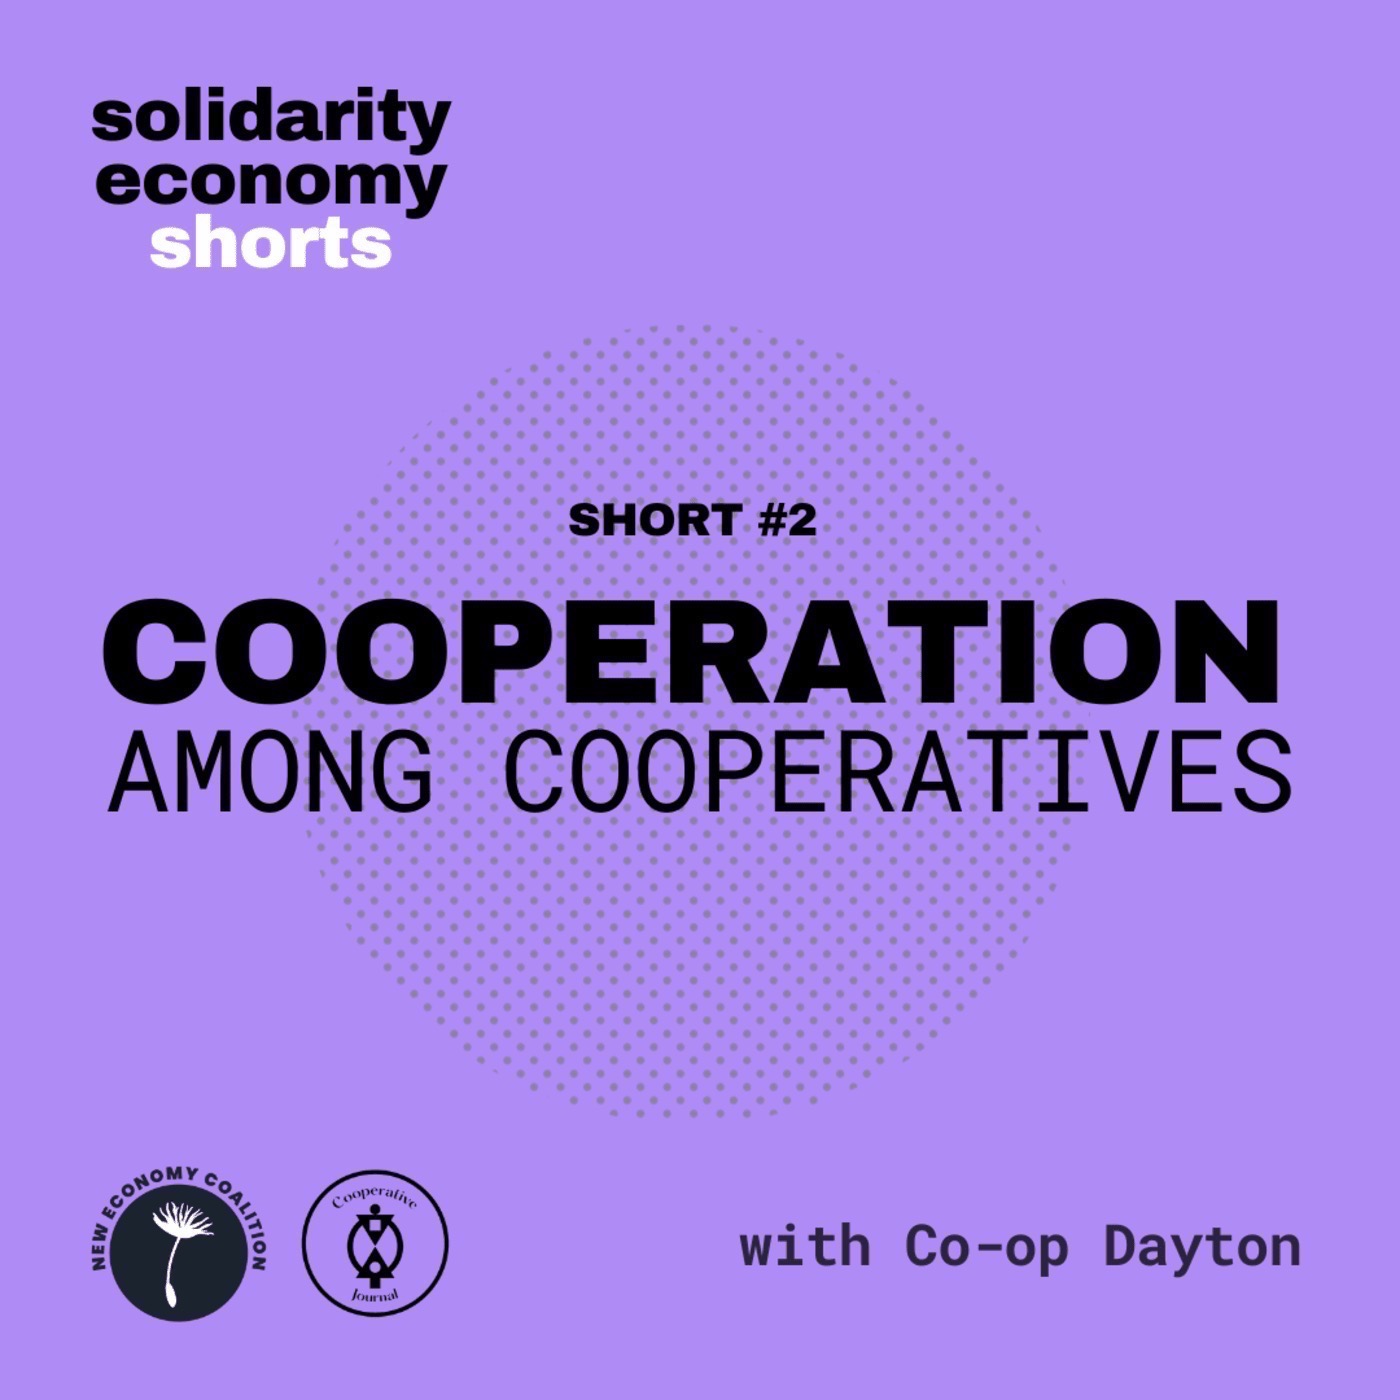 Solidarity Economy Shorts #2: Cooperation Among Cooperatives with Co-op Dayton